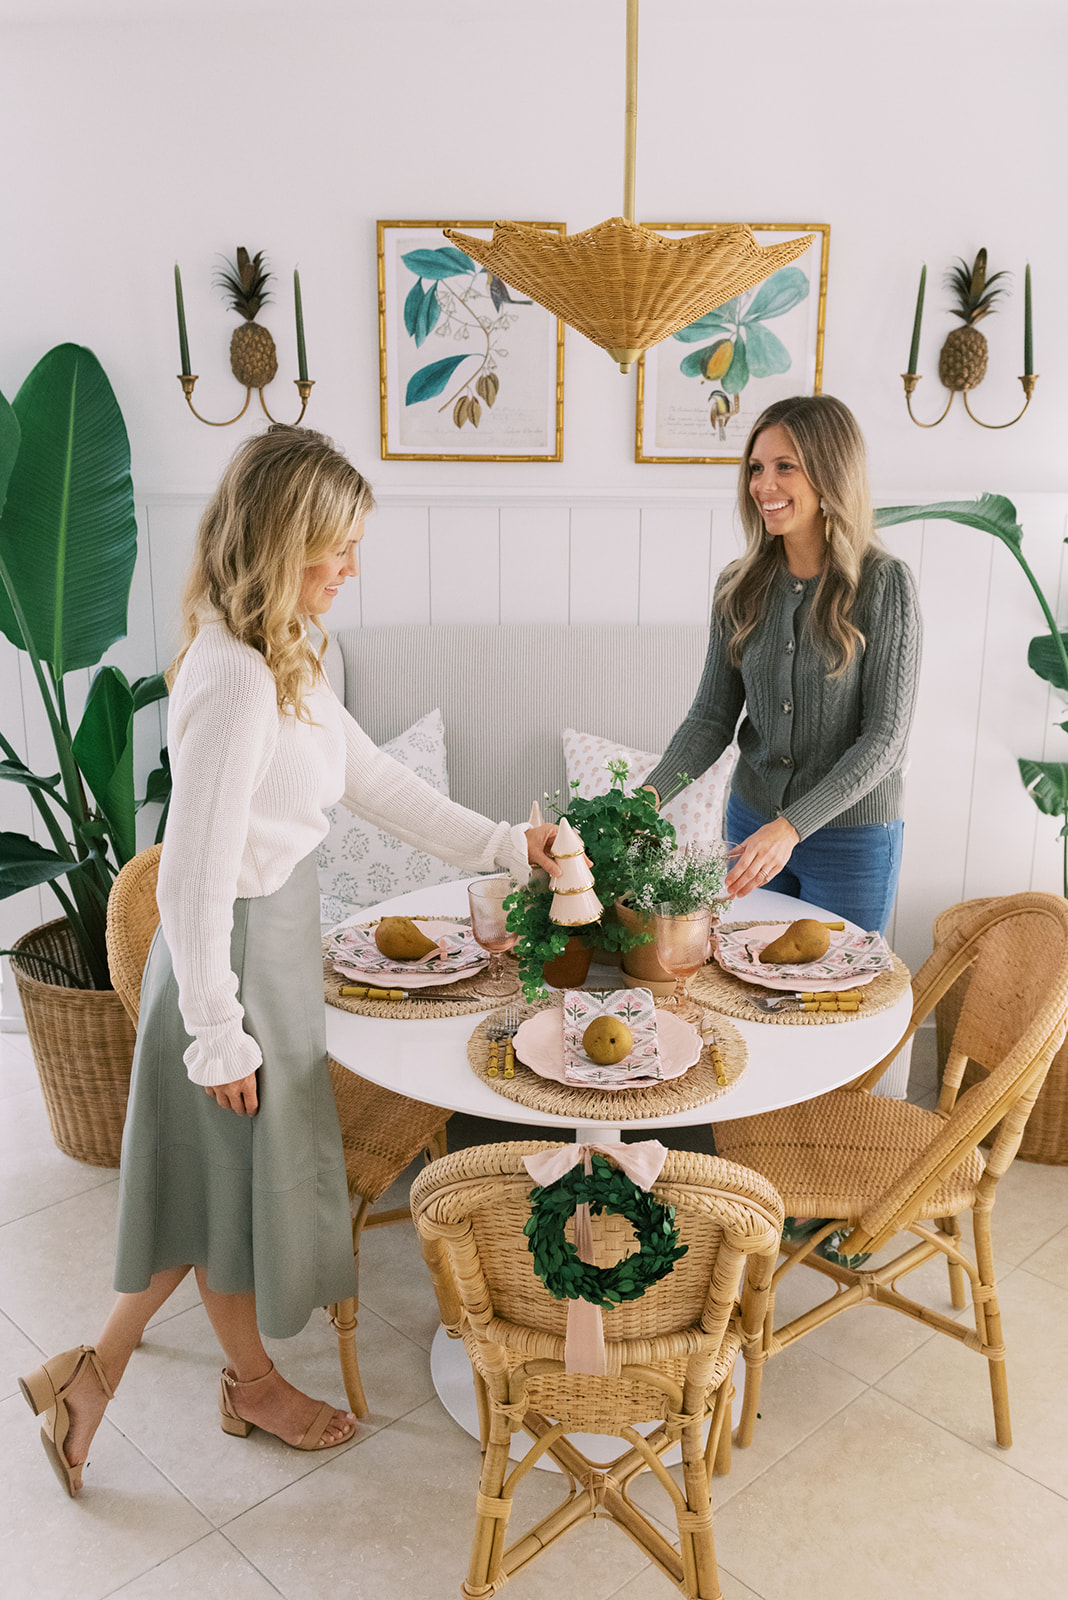 Holidays at Home: Tablescape with Palm Beach Lately